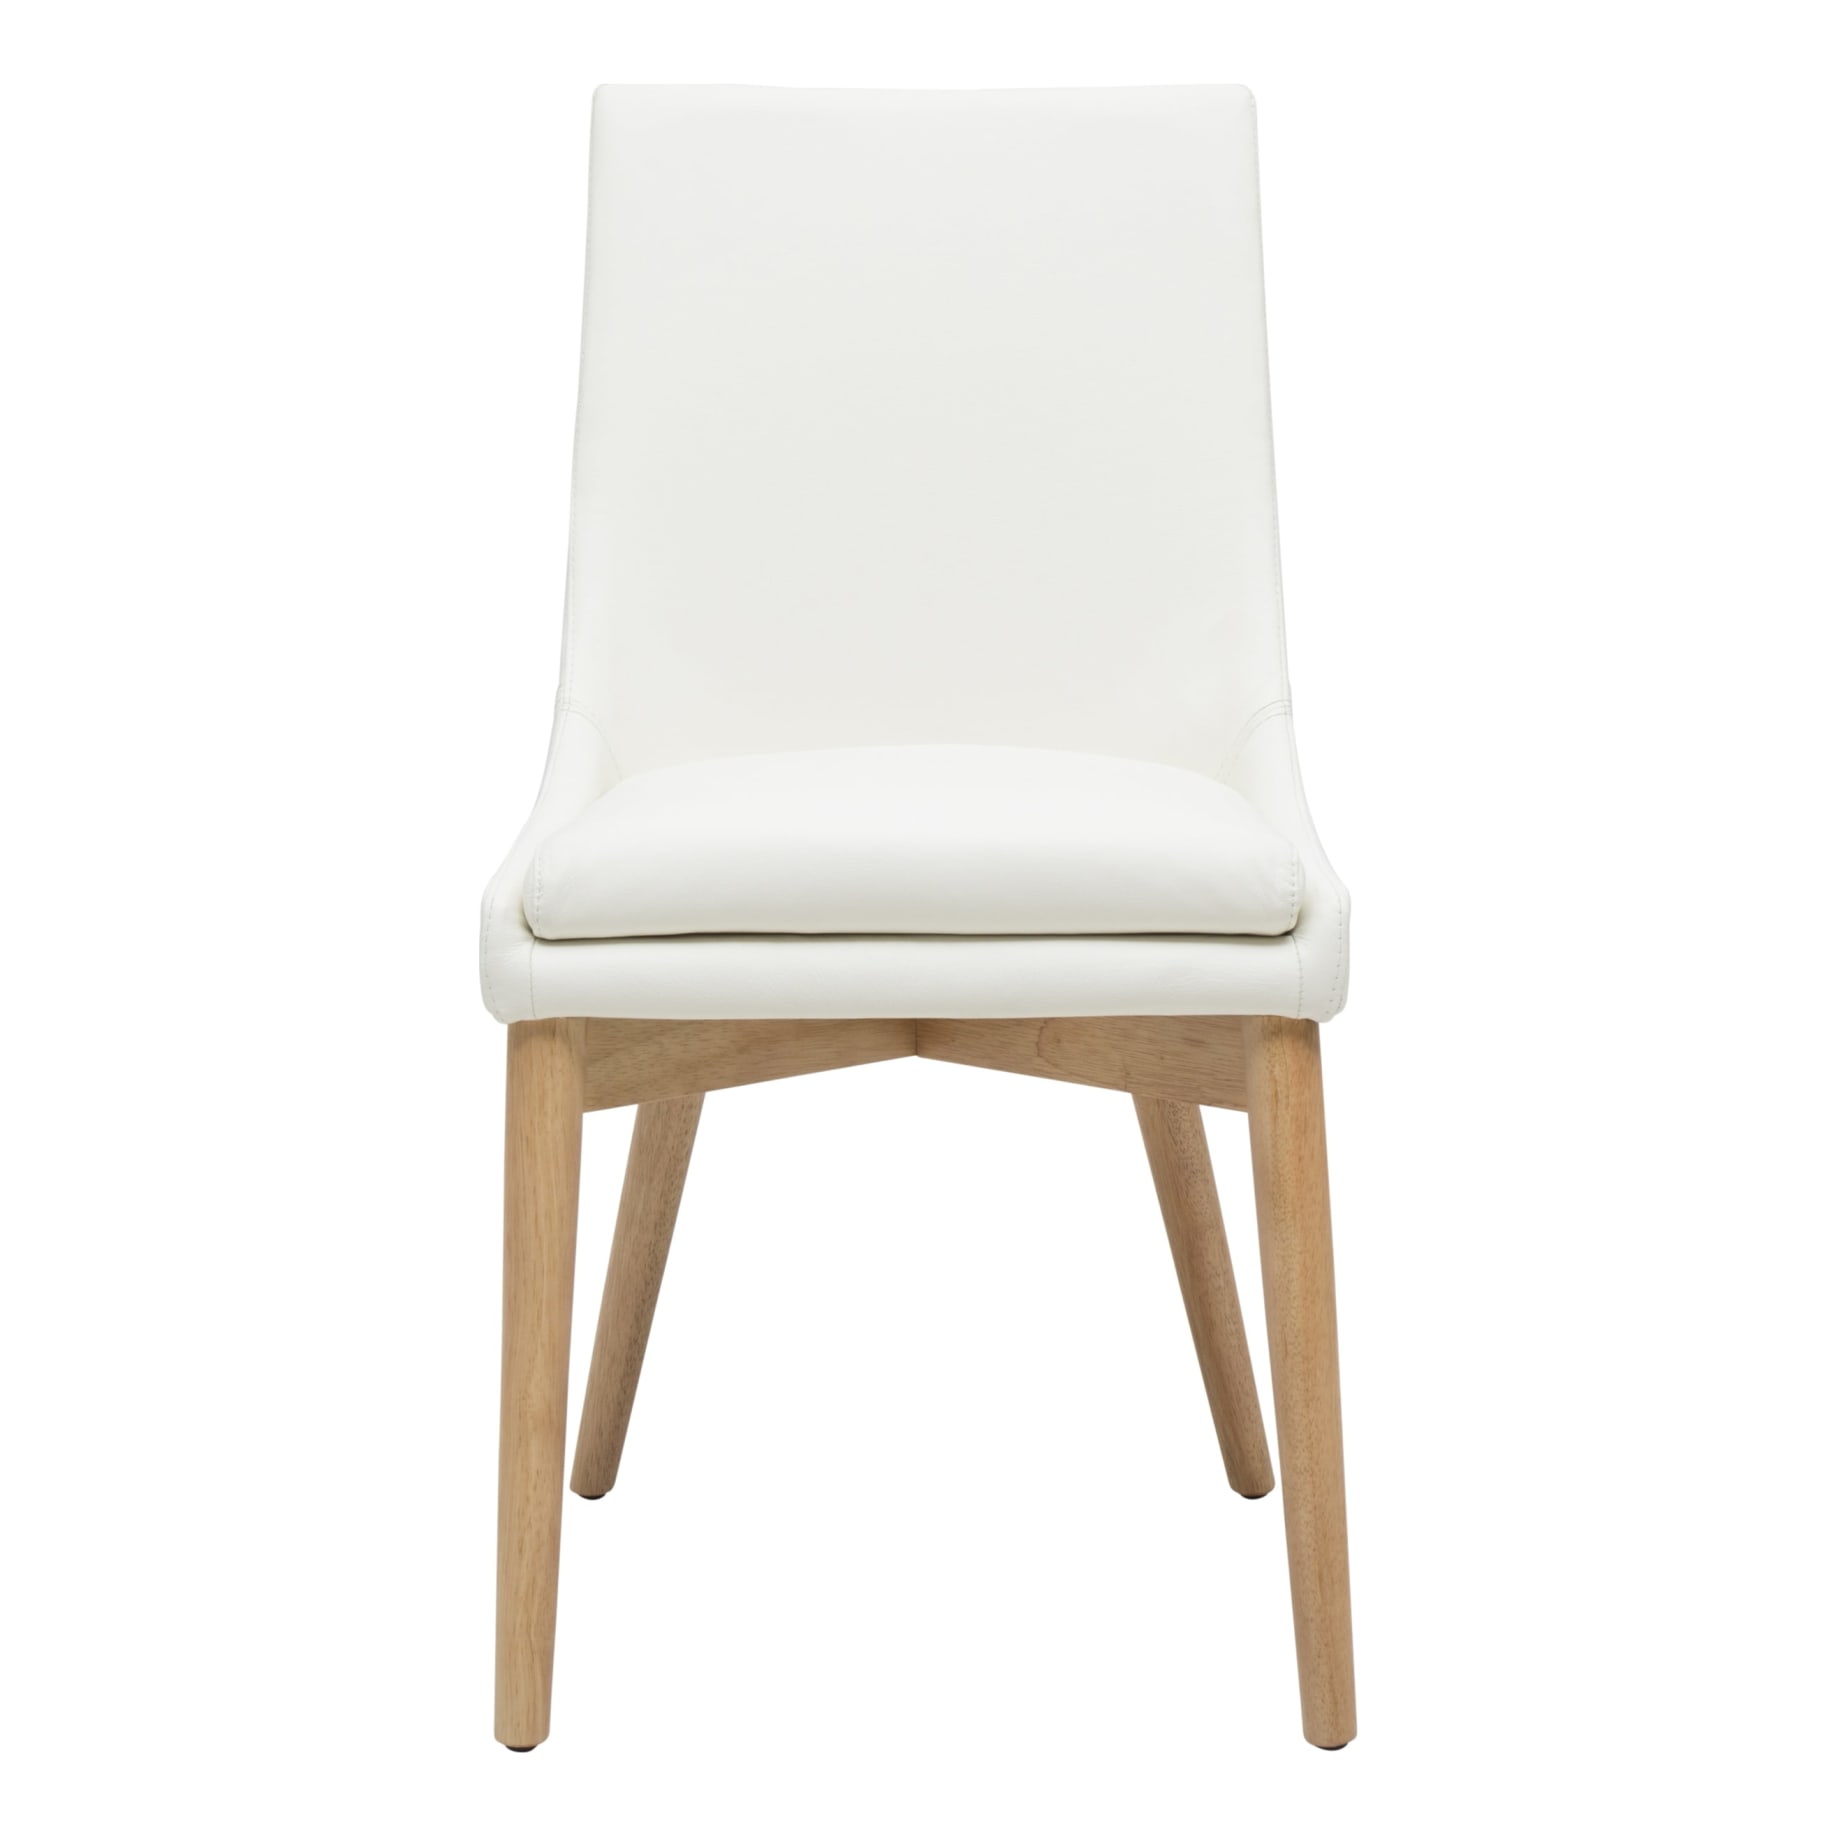 Highland Dining Chair in Leather White / Clear Lacquer